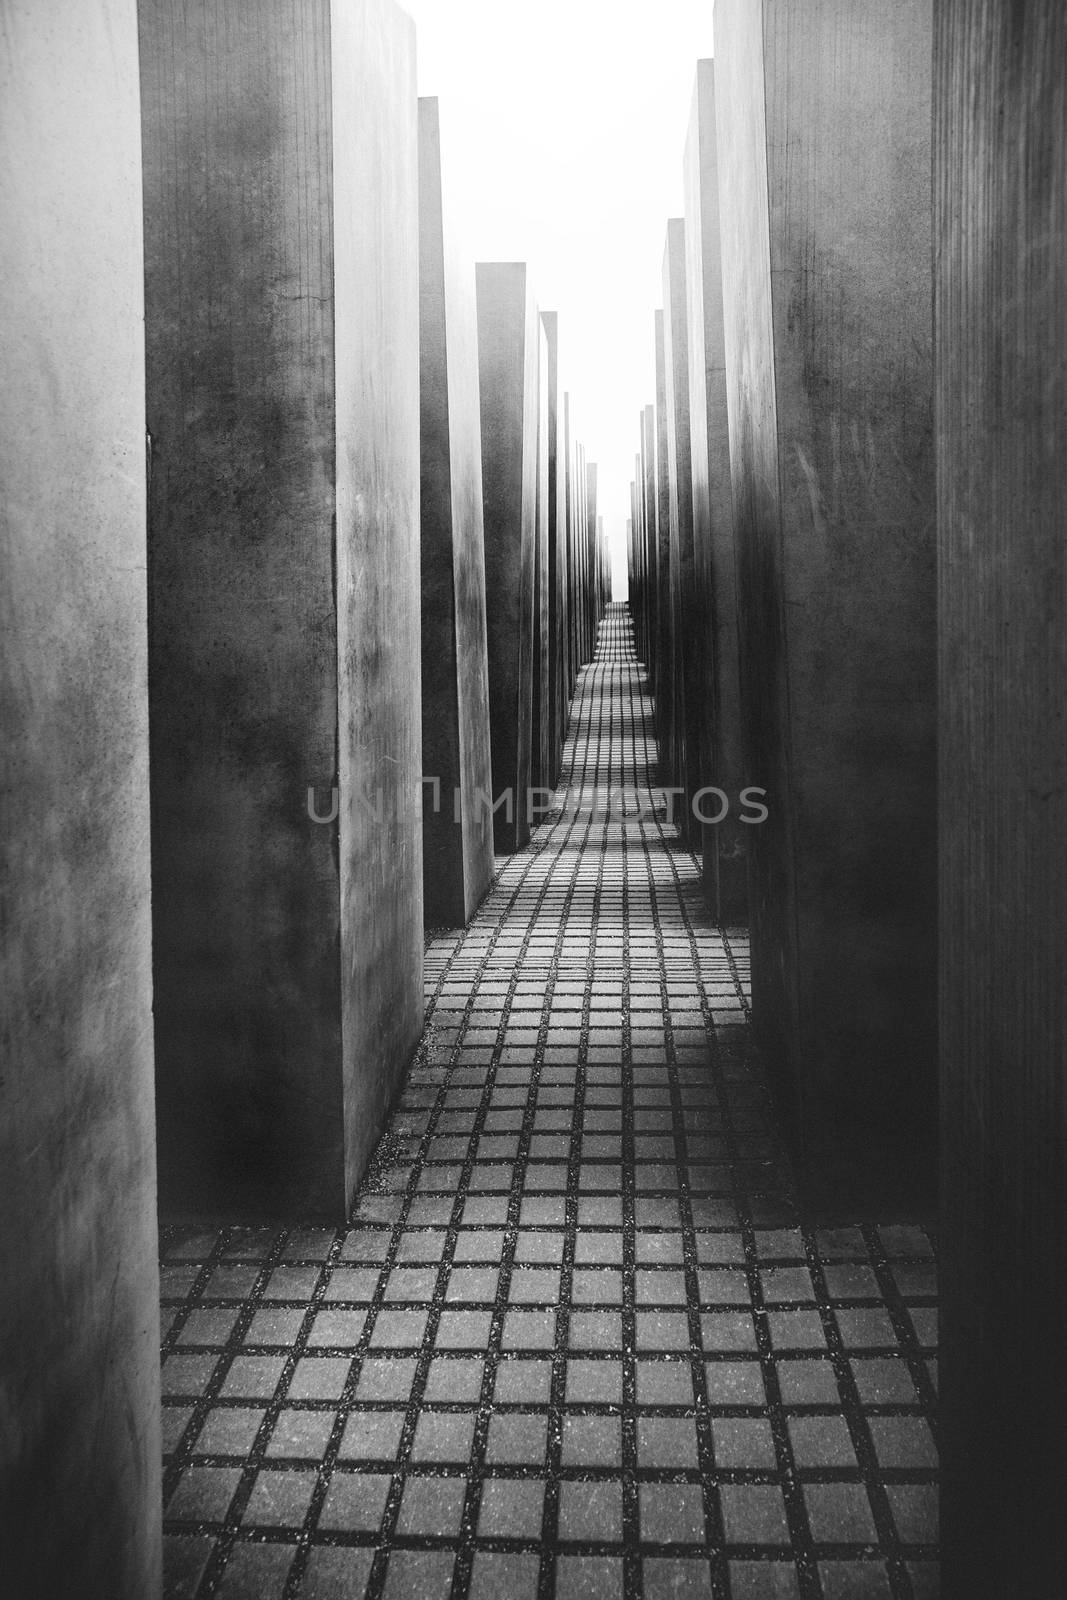 The Memorial to the Murdered Jews of Europe also known as the Holocaust Memorial in Berlin, Germany